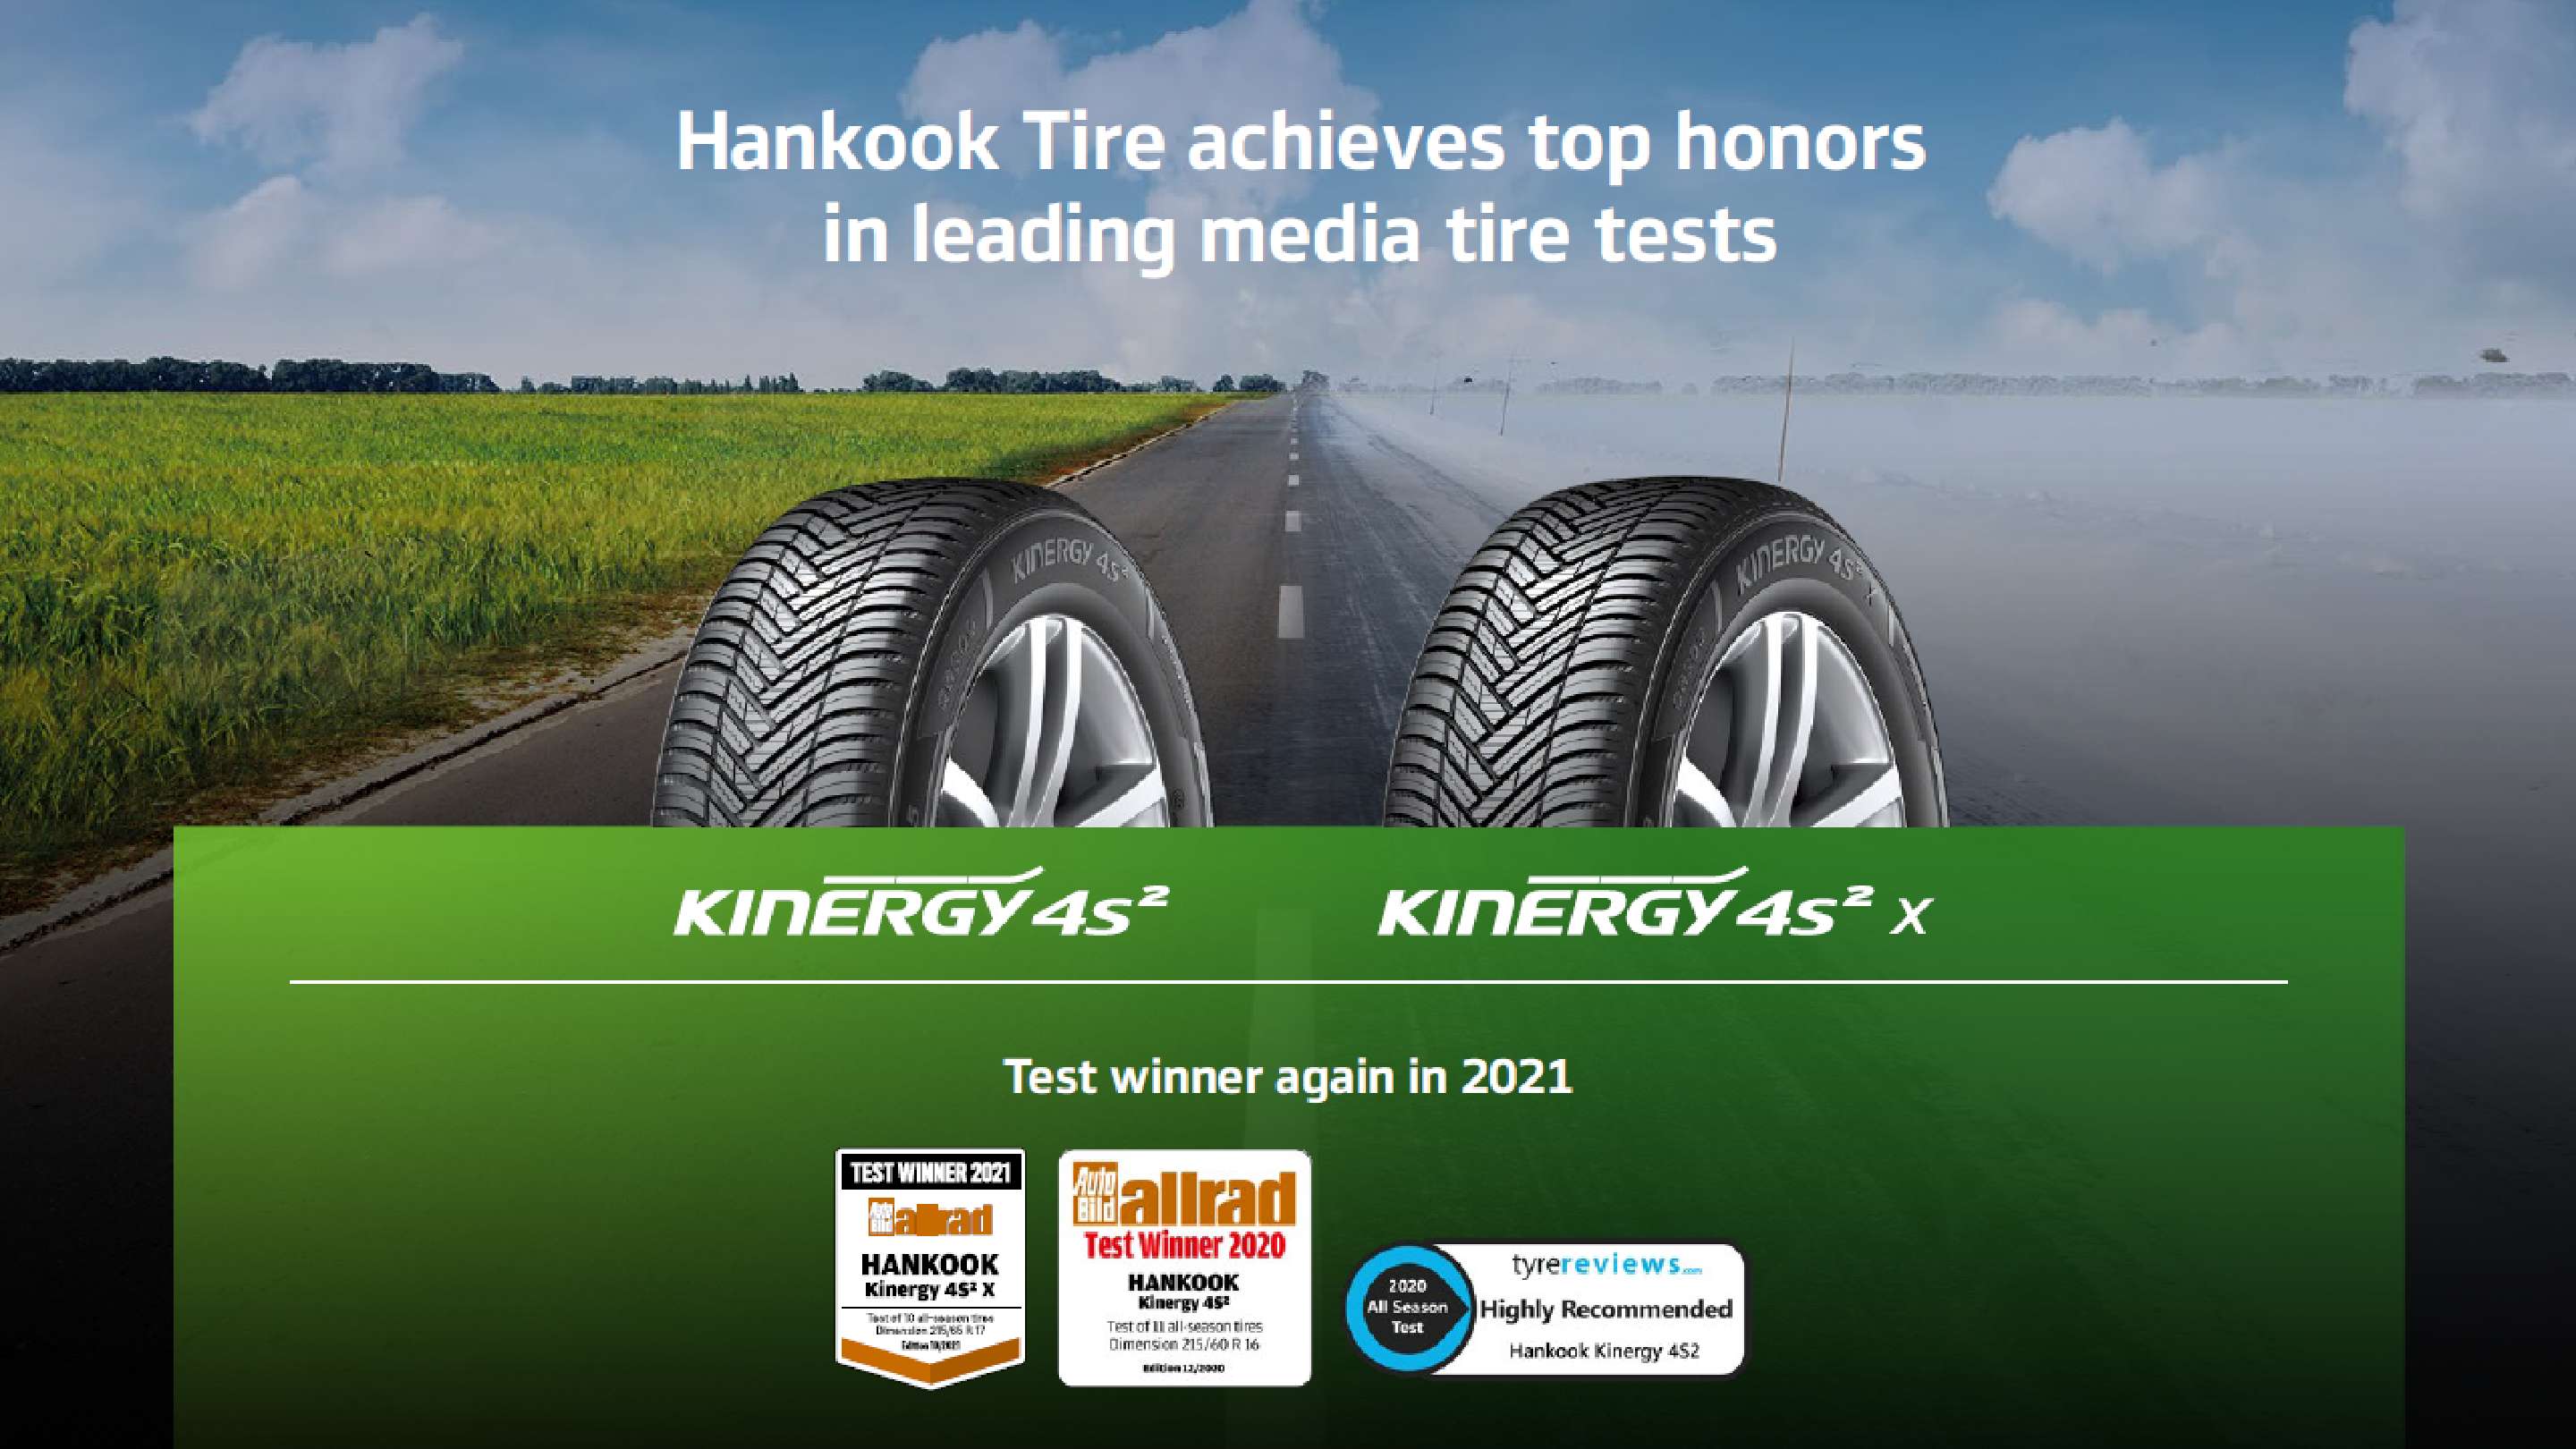 Hankook Tire & Technology-Technology in Motion-Kinergy 4S2X Responds to the calls of the market-1